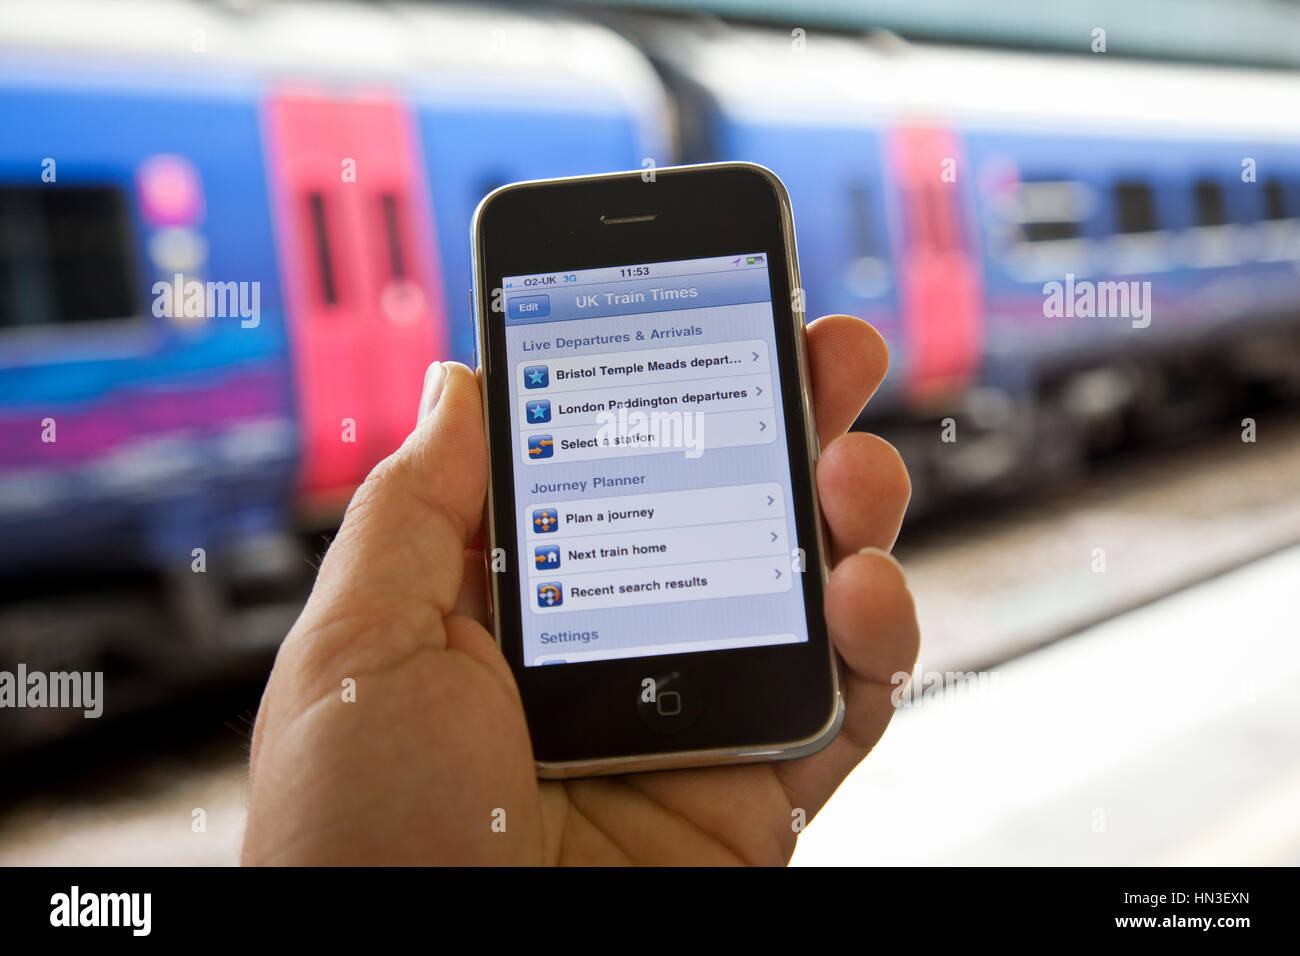 Bristol, United Kingdom - October 4, 2011: A male hand holding up an Apple iPhone 3Gs at Bristol Temple Meads station with train carriages out of focu Stock Photo